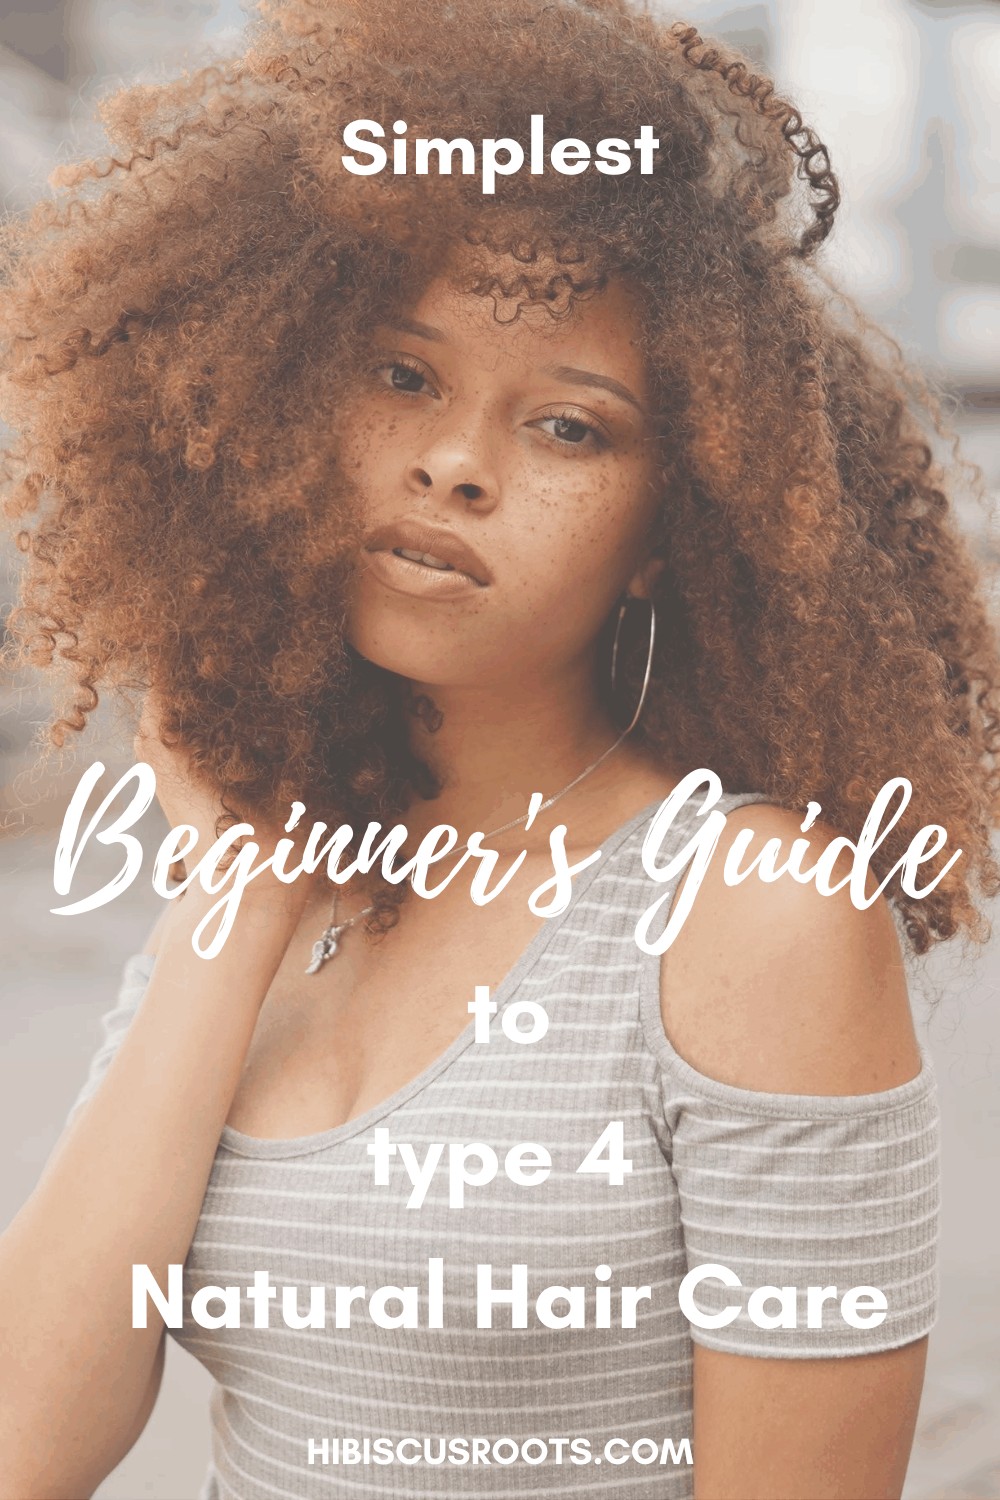 A Beginner\'s Guide to Ayurvedic Natural Hair Care!